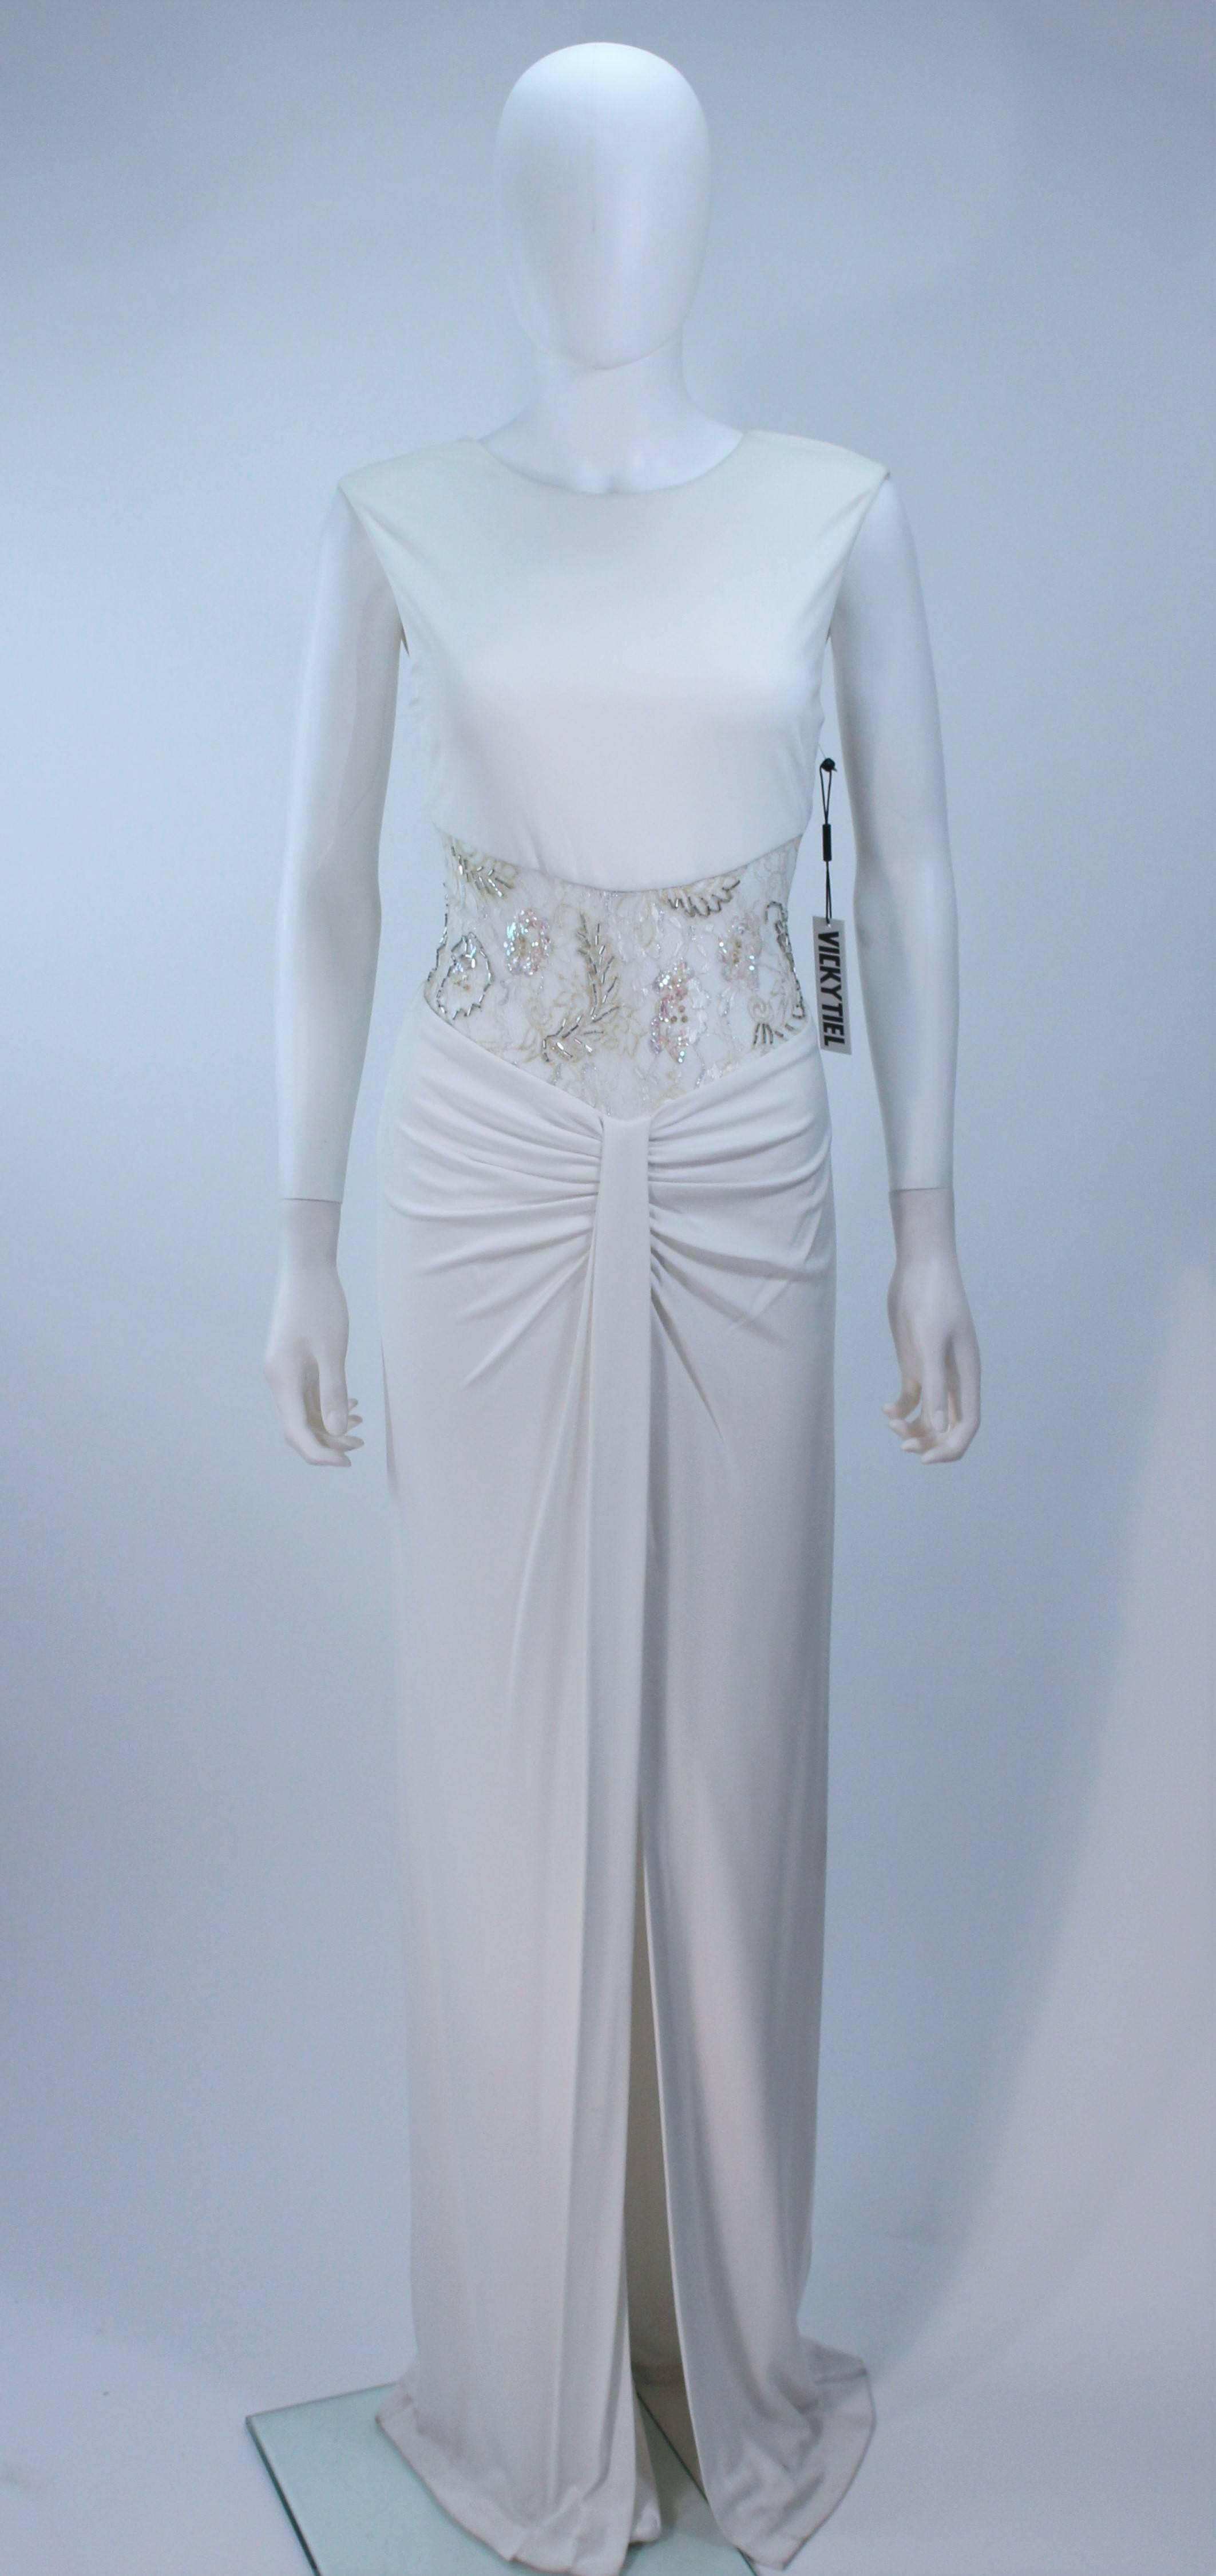  This Vicky Tiel  gown is composed of a draped jersey. Features a sheer lace bodice with sequin applique. There is a center back zipper closure with buttons. In great vintage condition. 

  **Please cross-reference measurements for personal